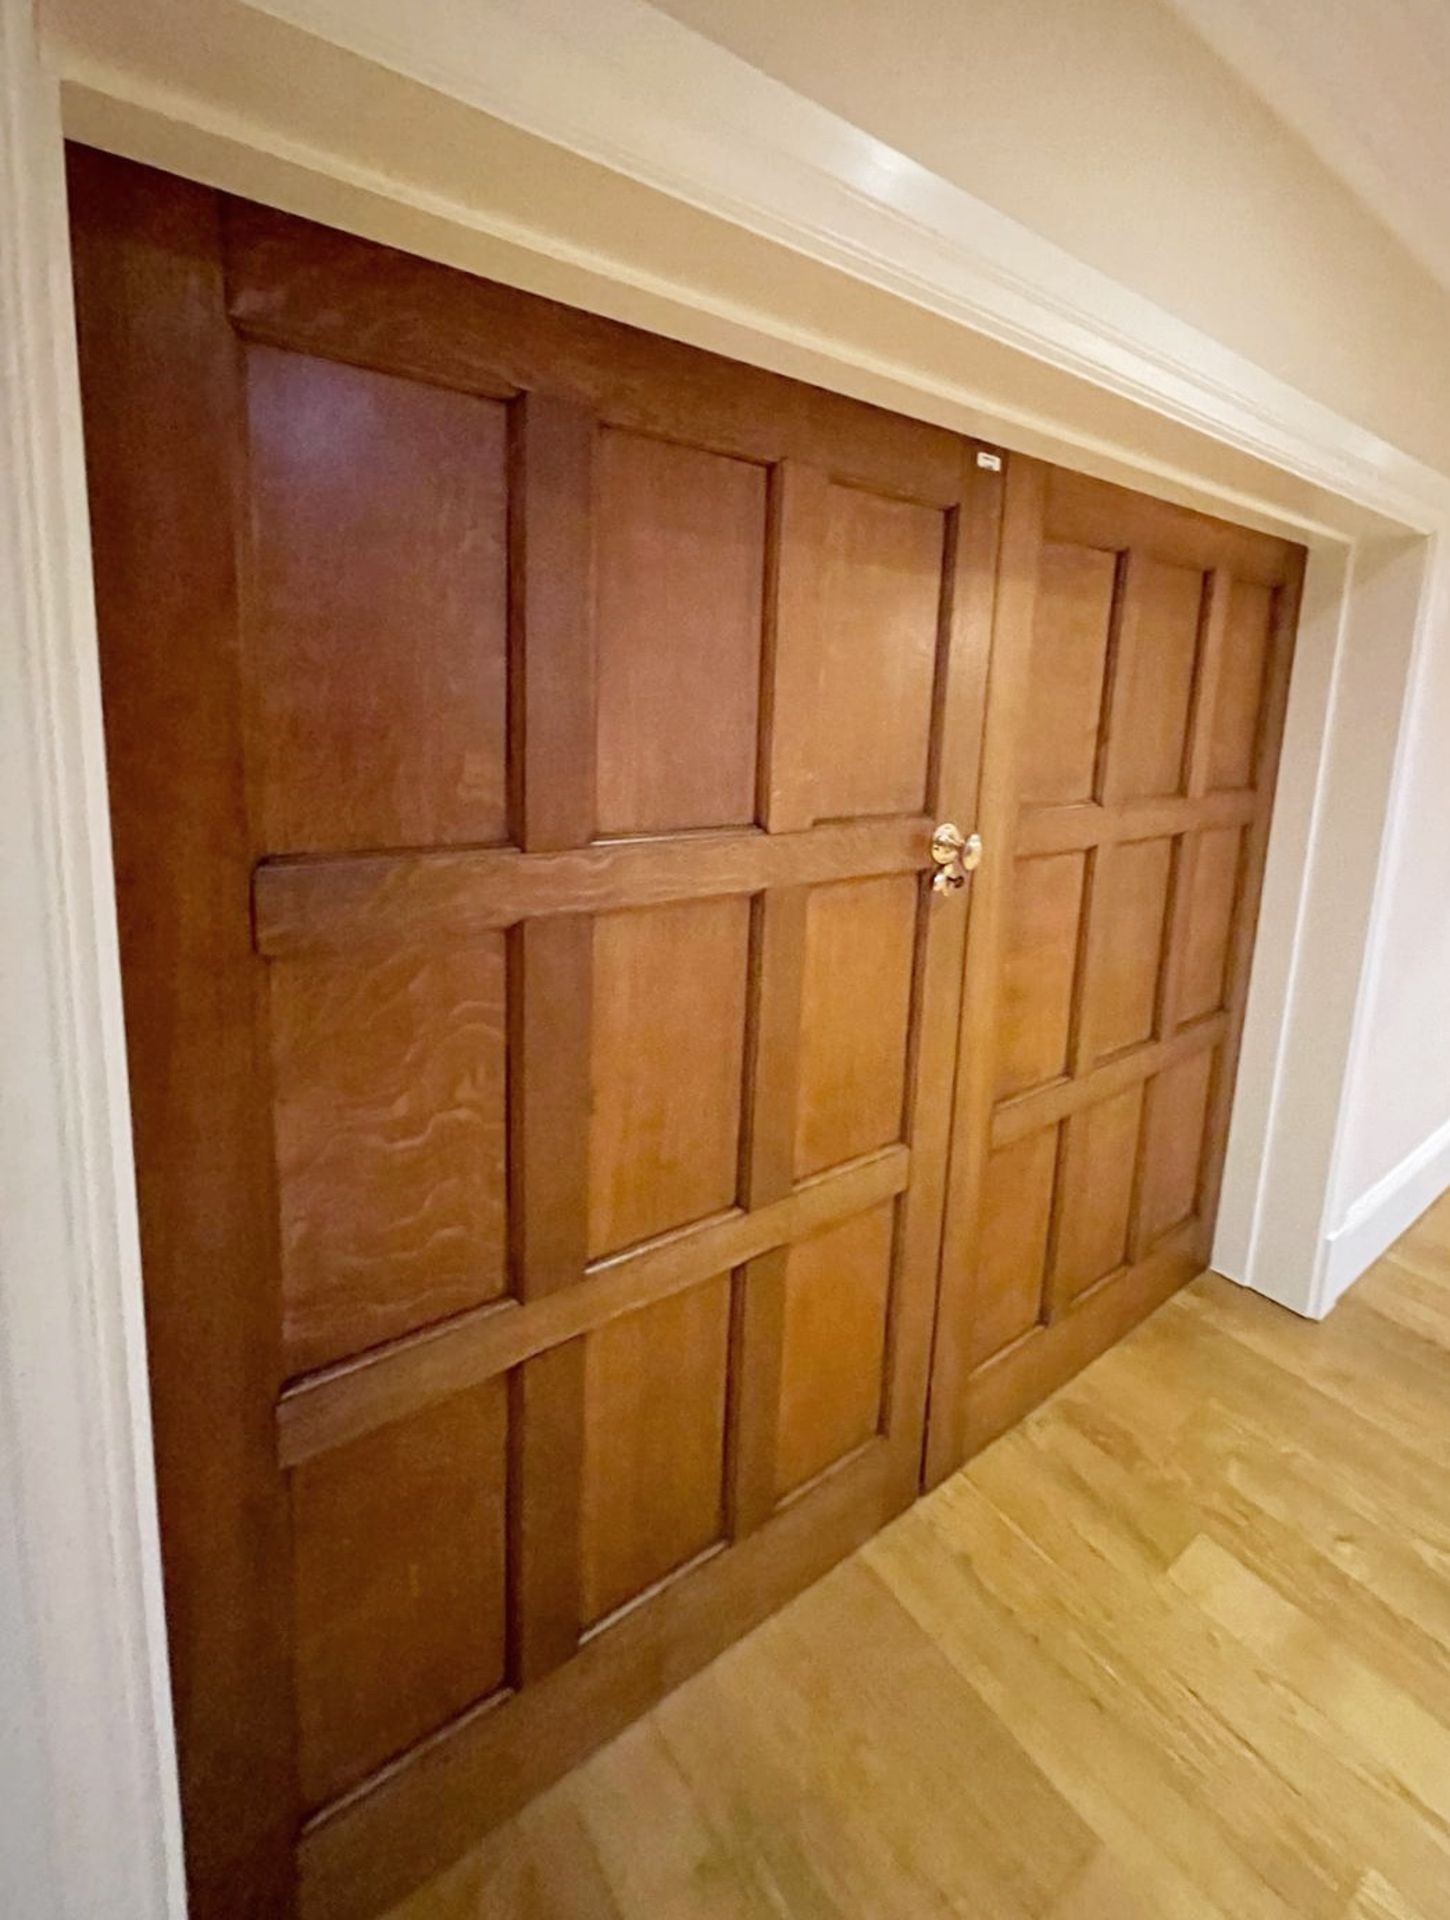 1 x Set of Solid Wood Stately Lockable External Double Doors, with Hinges and Handles - Ref: PAN153 - Image 2 of 7